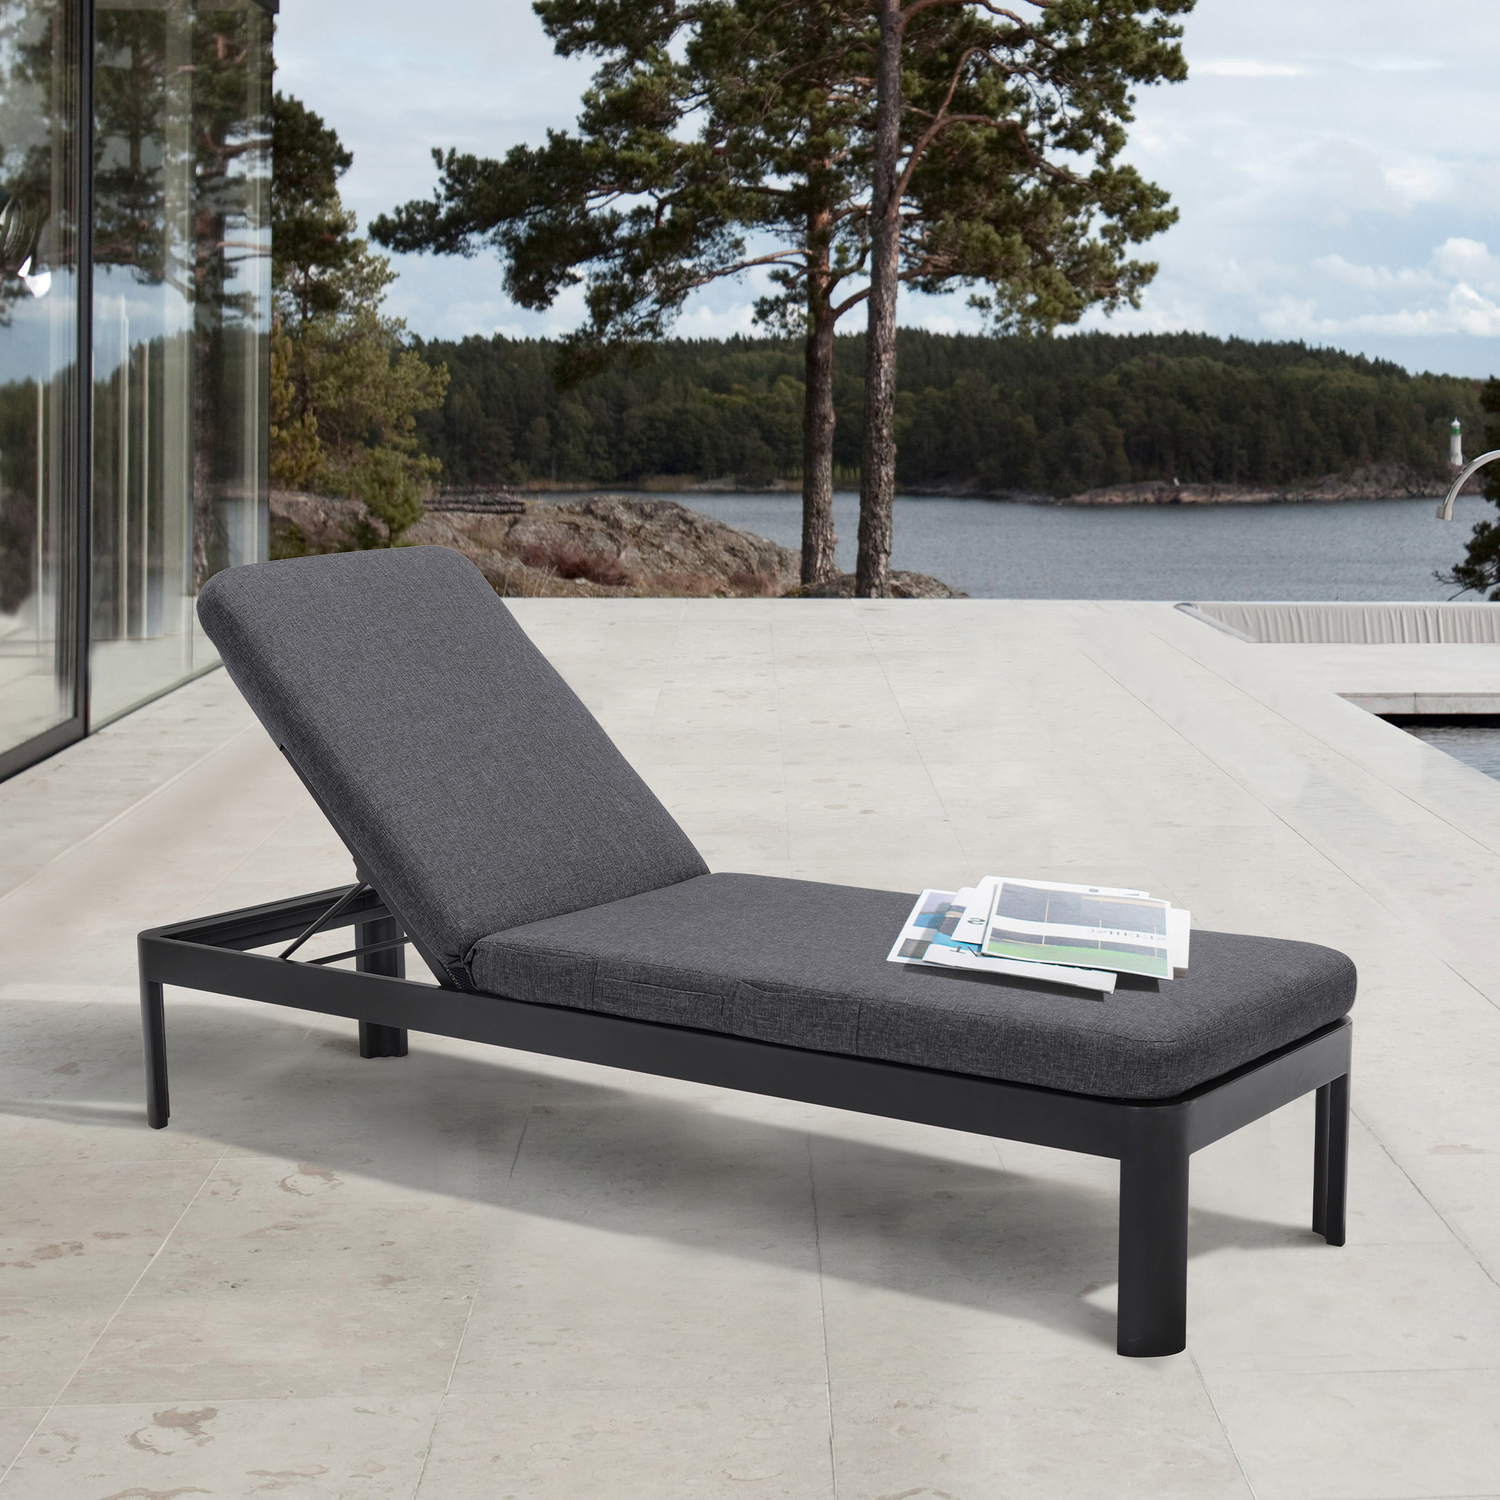 Portals Outdoor Chaise Lounge Chair in Black Finish and Grey Cushions - image 5 of 5